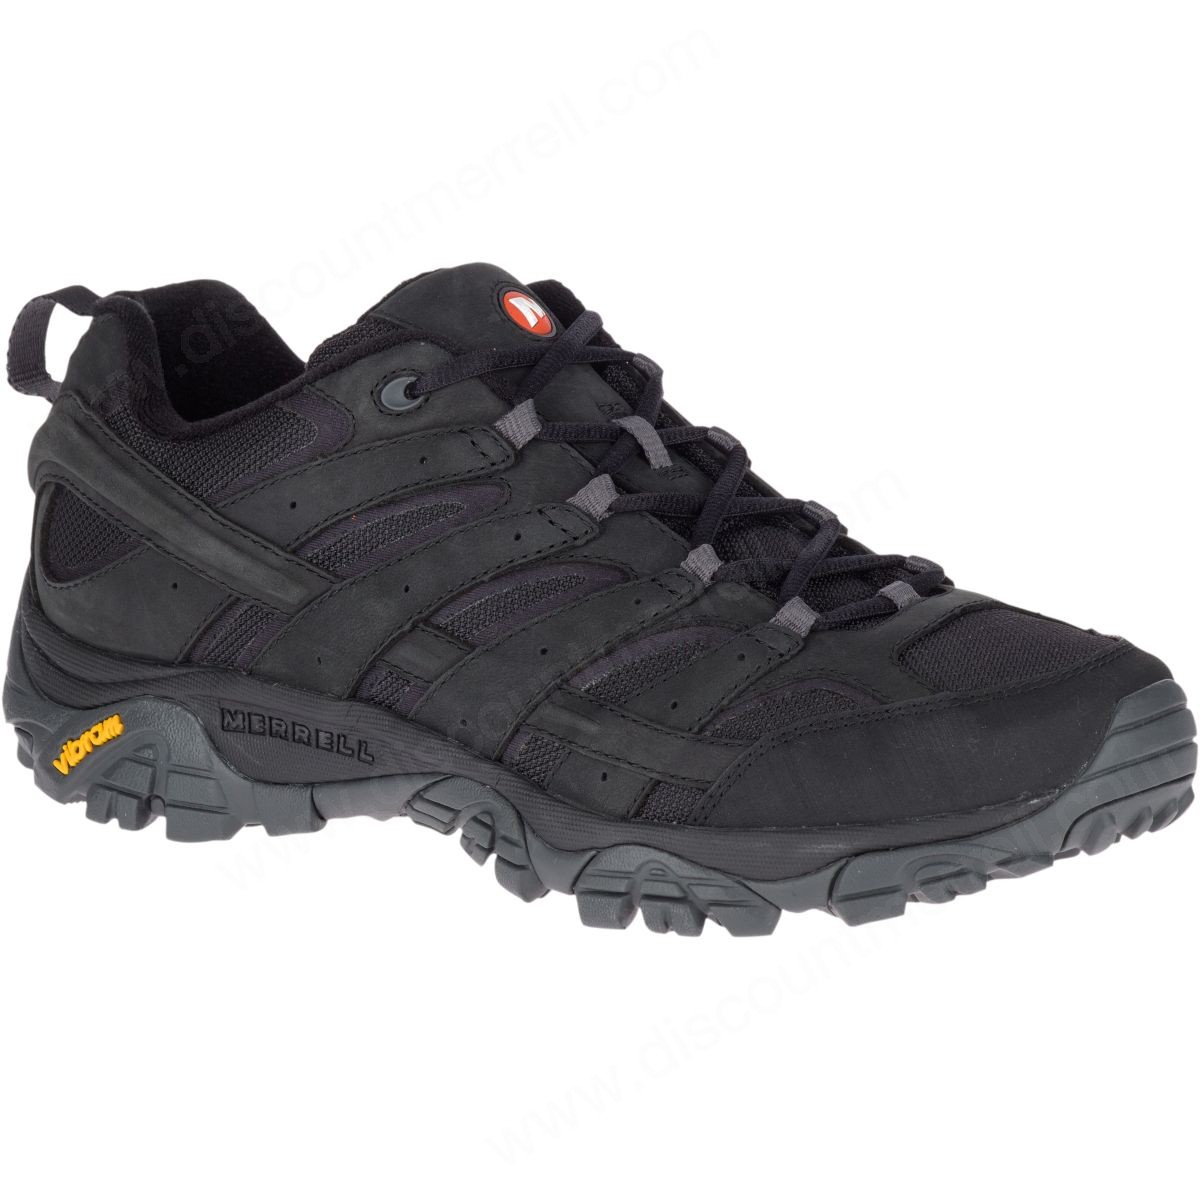 Merrell Man's Moab Mother Of All Boots™ Smooth Black - Merrell Man's Moab Mother Of All Boots™ Smooth Black